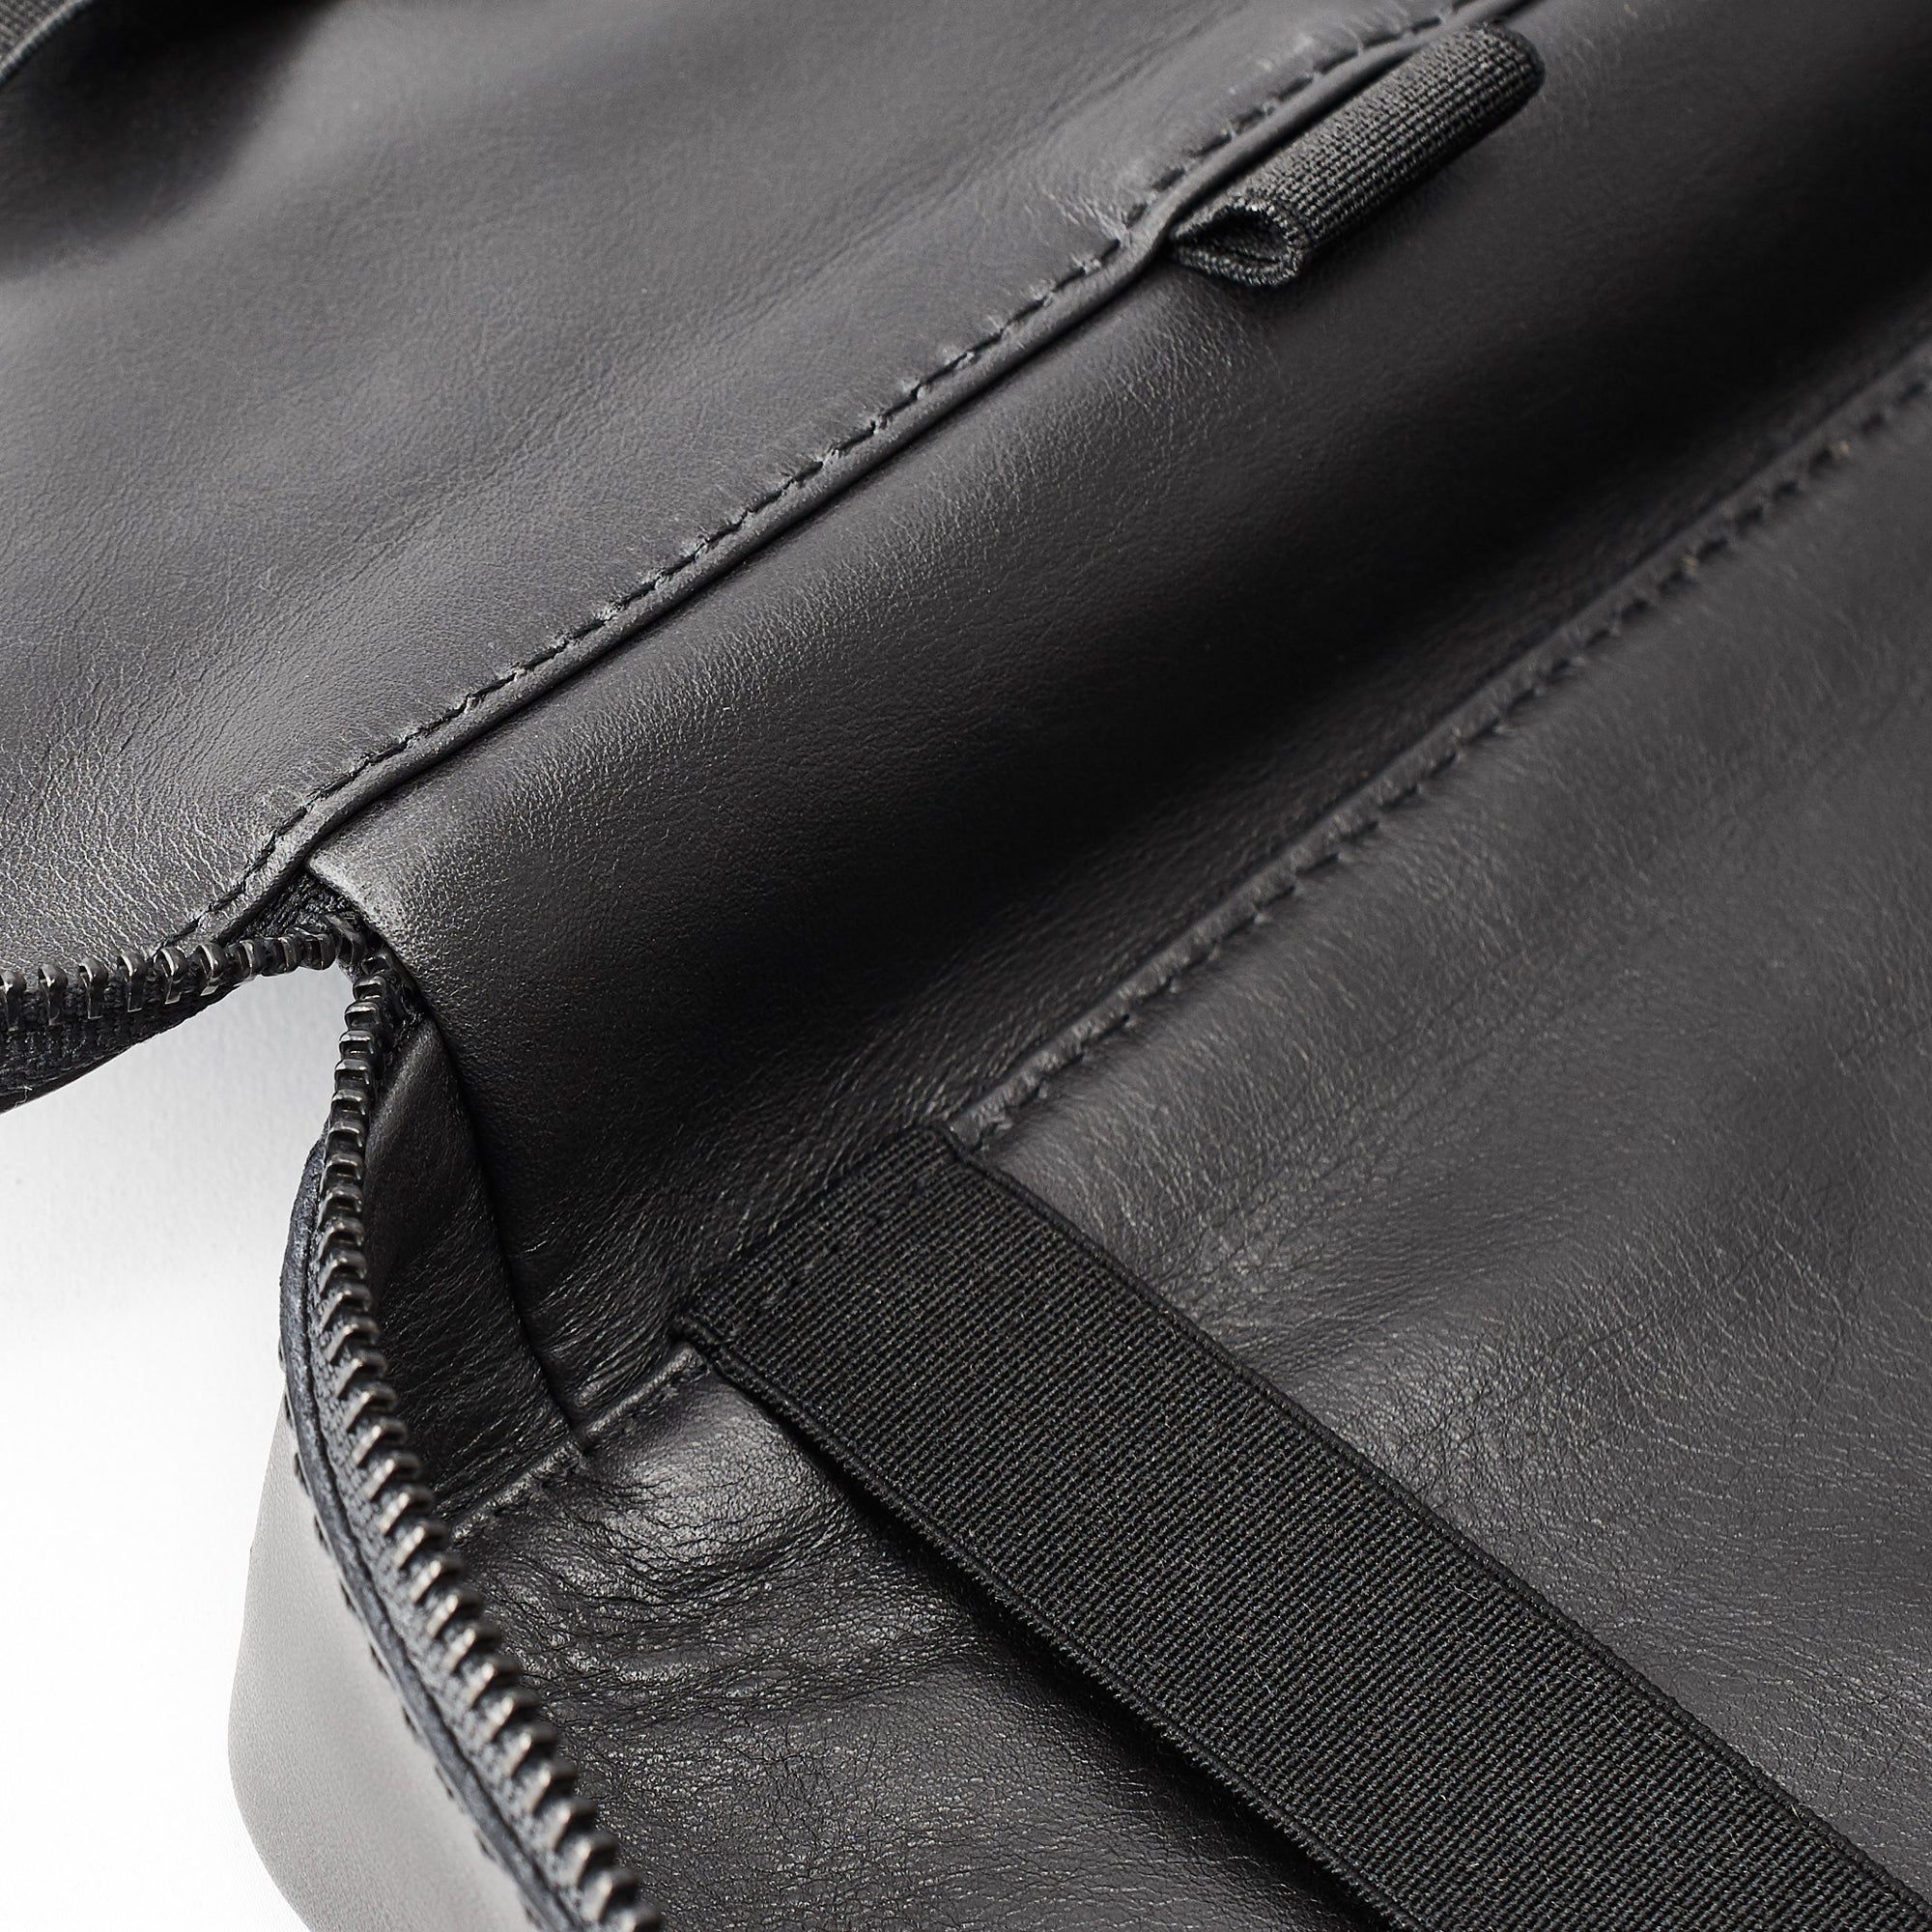 Leather interior detail. Black tech accessory organizer by Capra Leather